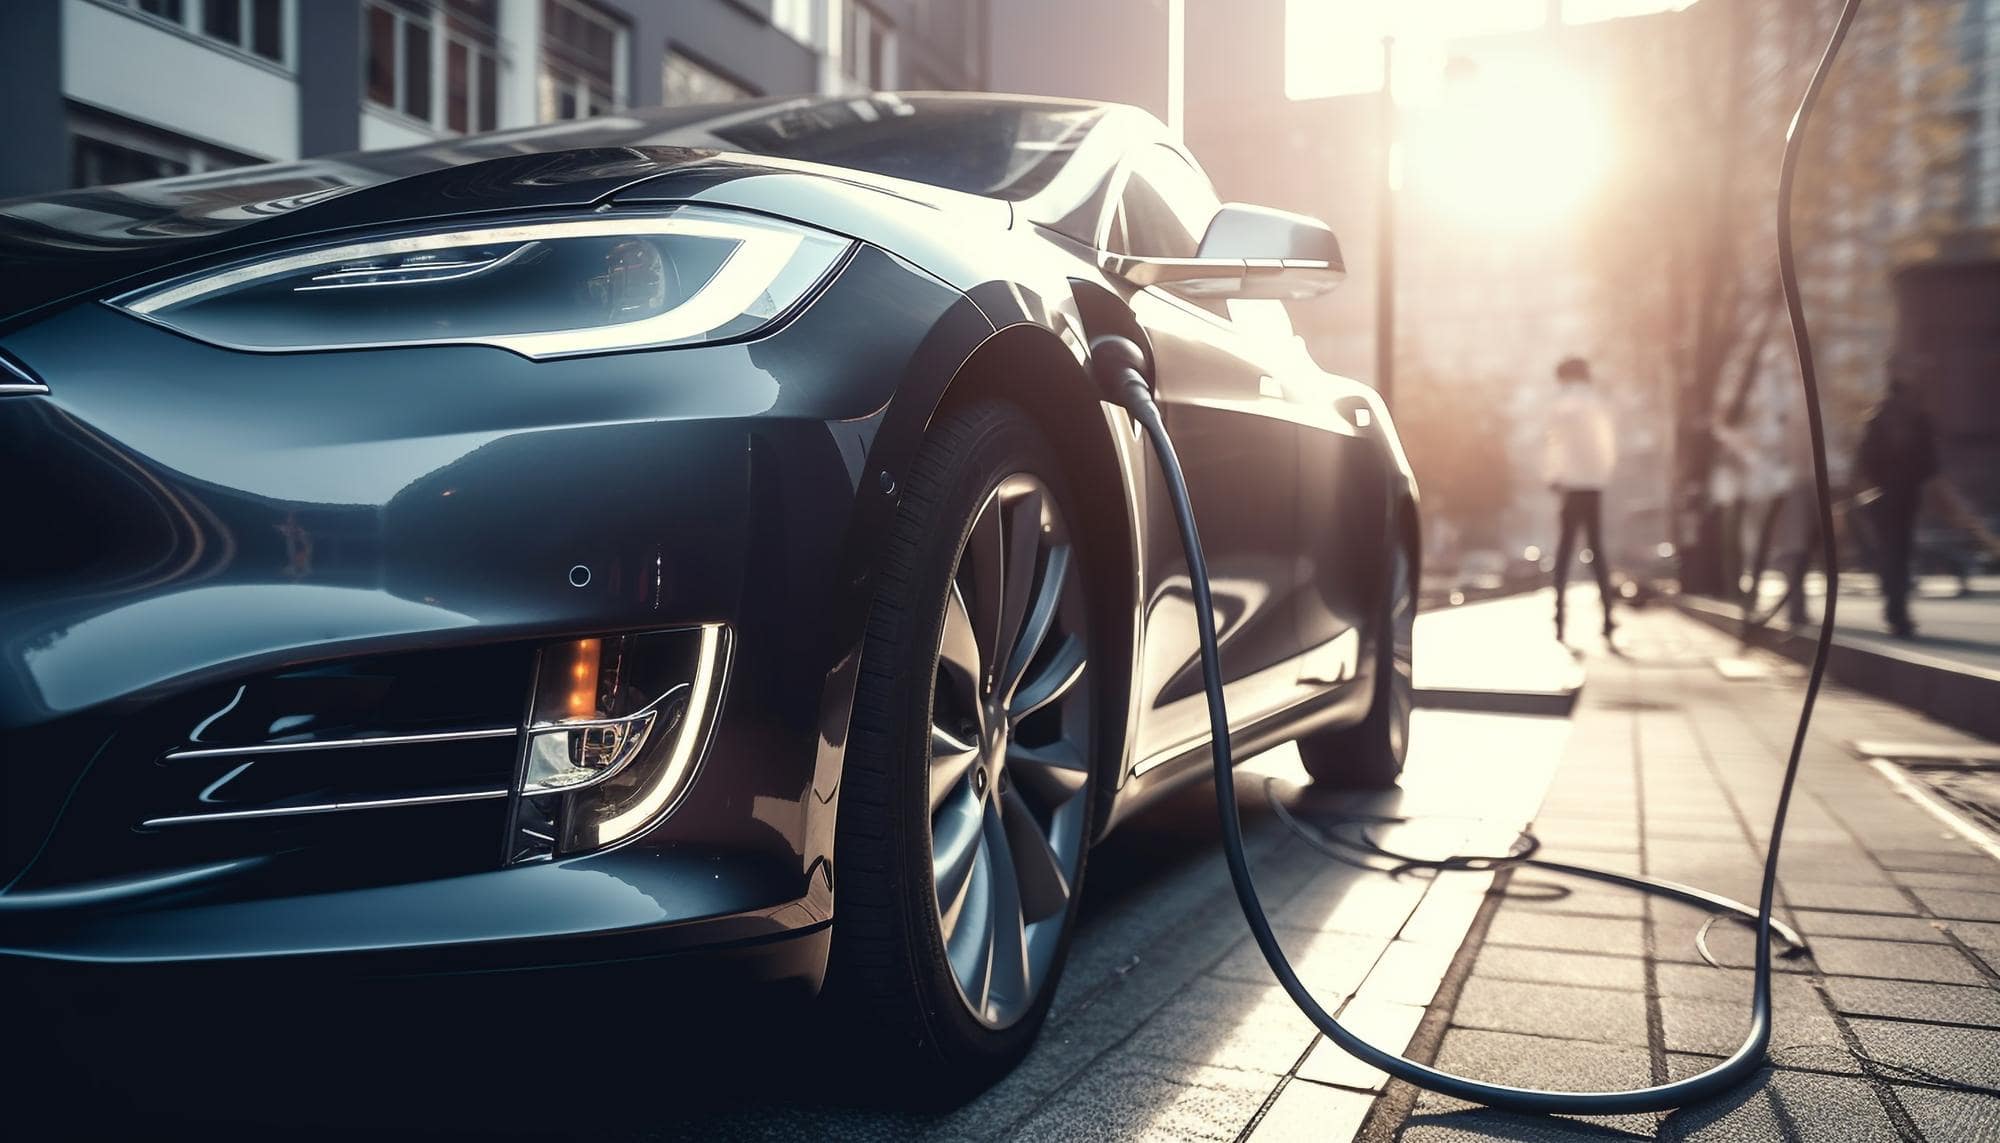 30 interesting facts about Tesla